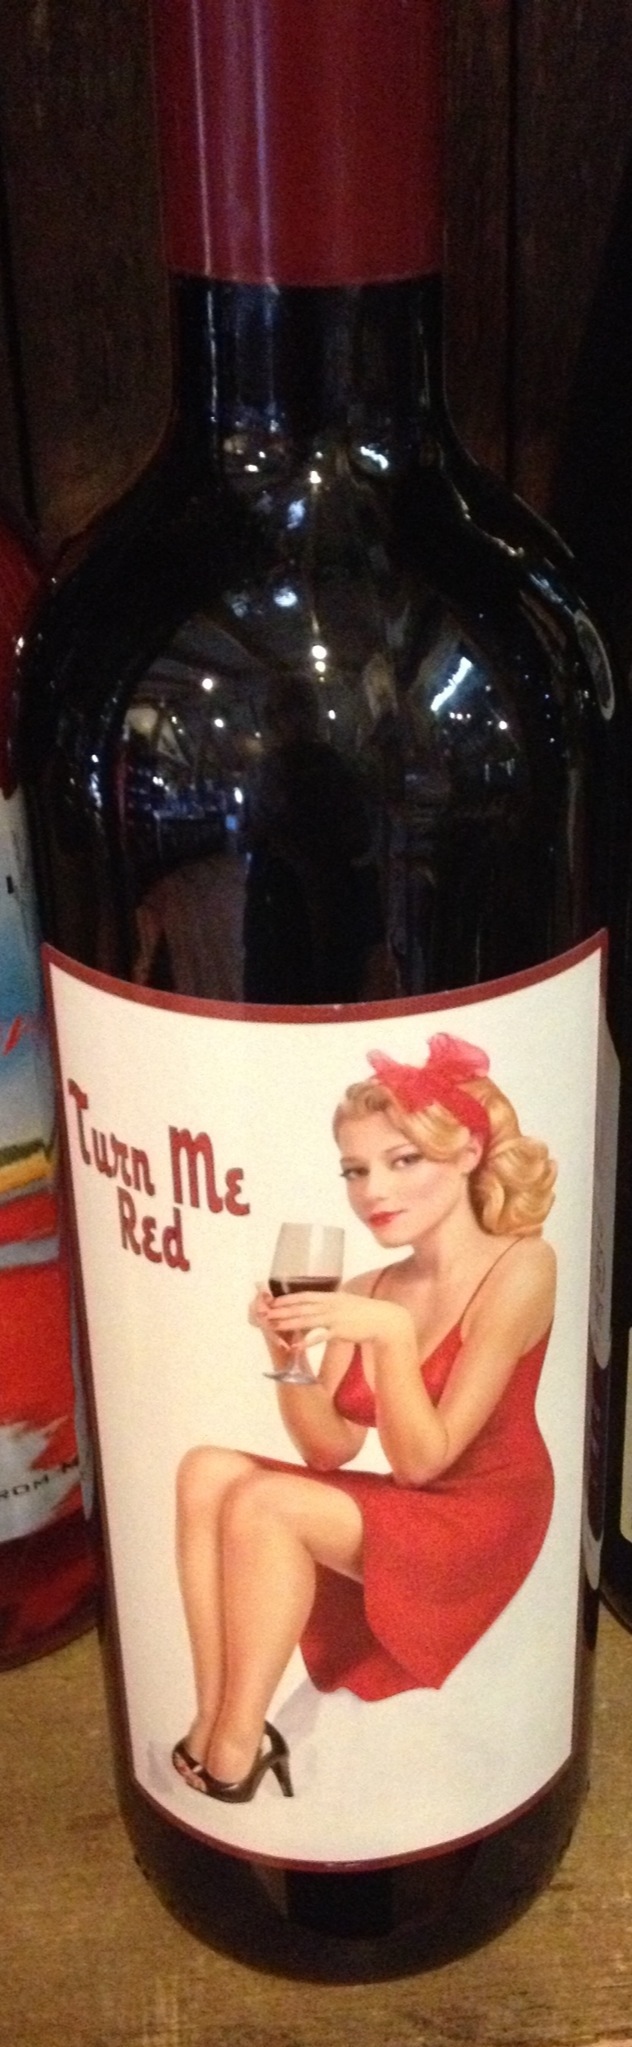 Wine bottle with pinup on it-Turn Me Red. 